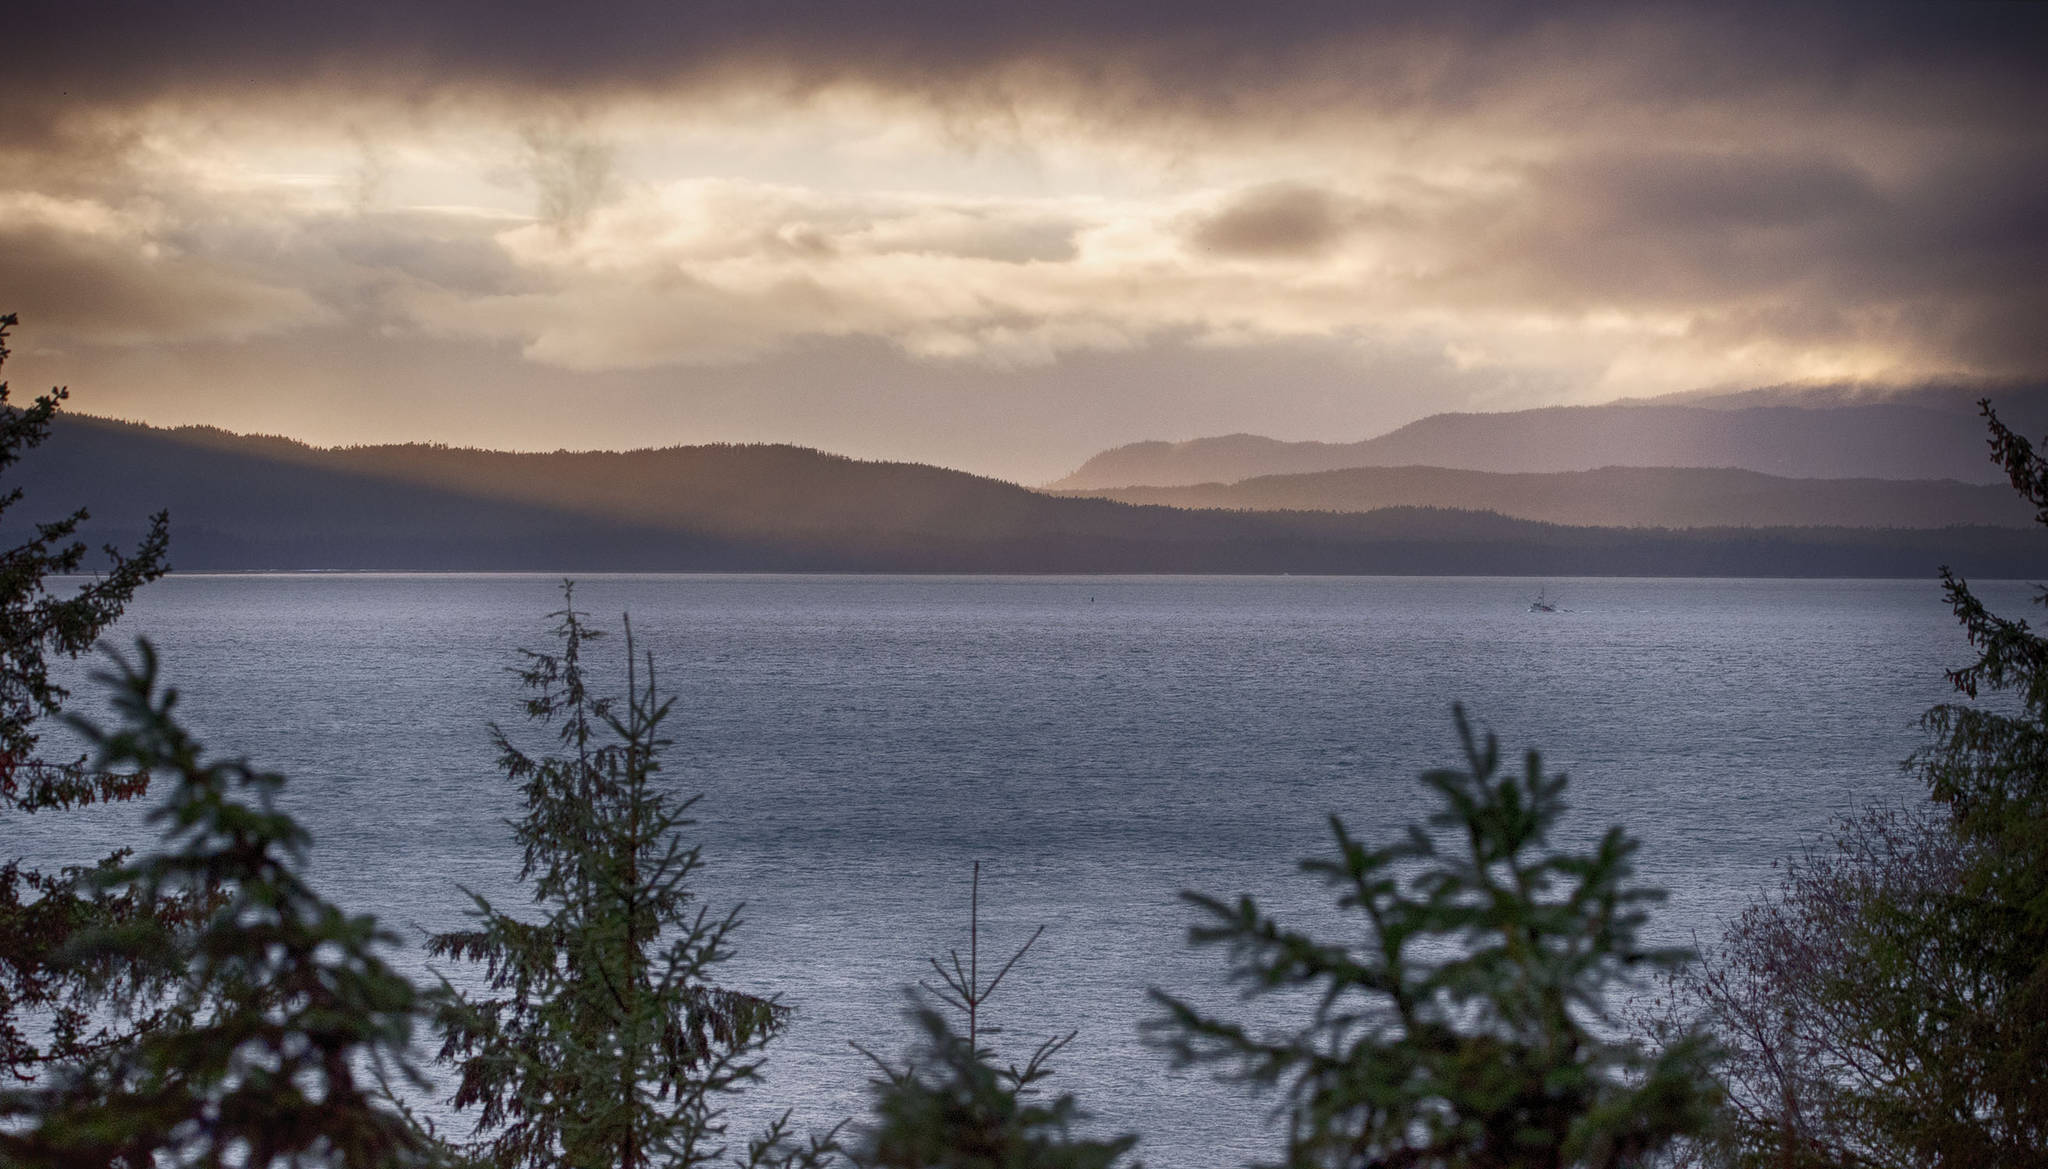 This photo shows a winter sunset with a coming storm from over Mansfield Peninsula, Admiralty Island on Dec. 4. (Courtesy Photo / Kenneth Gill, gillfoto)